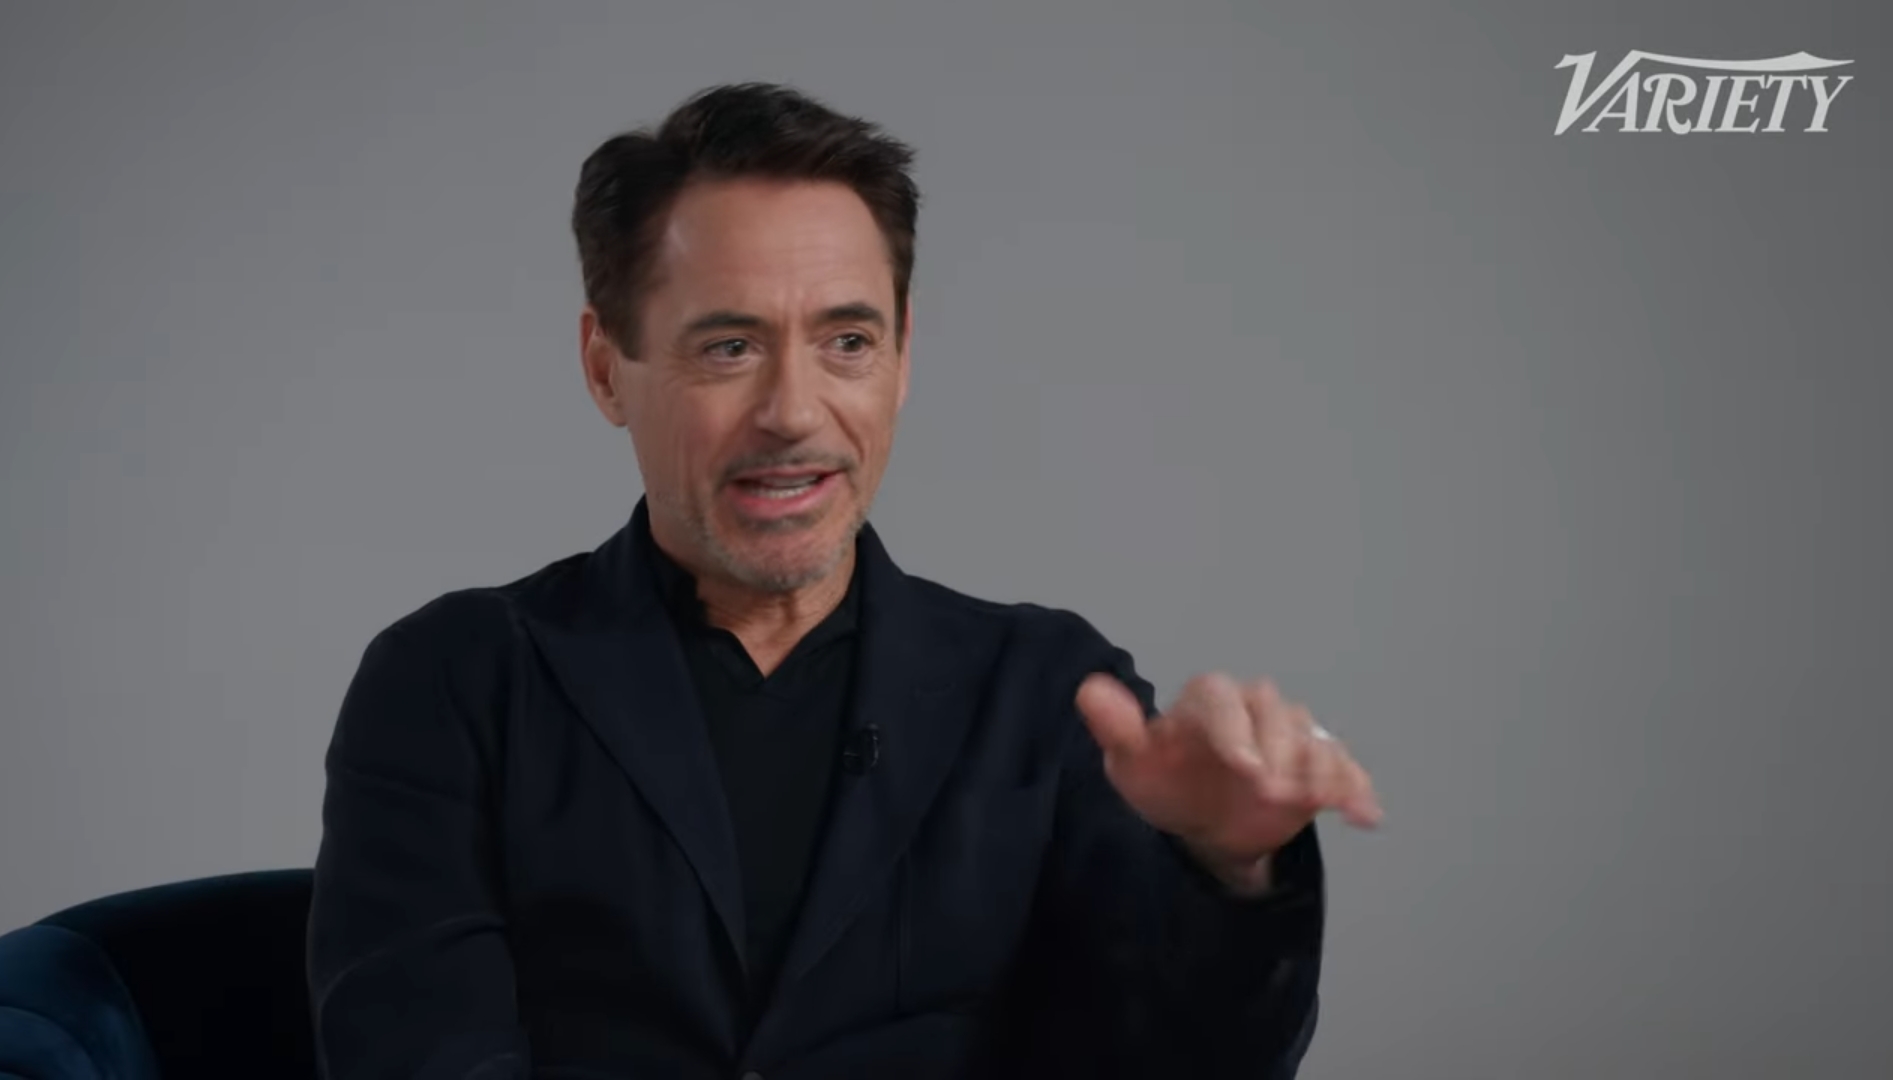 Robert Downey Jr. during Variety's Actor on Actor interview. Source: Variety